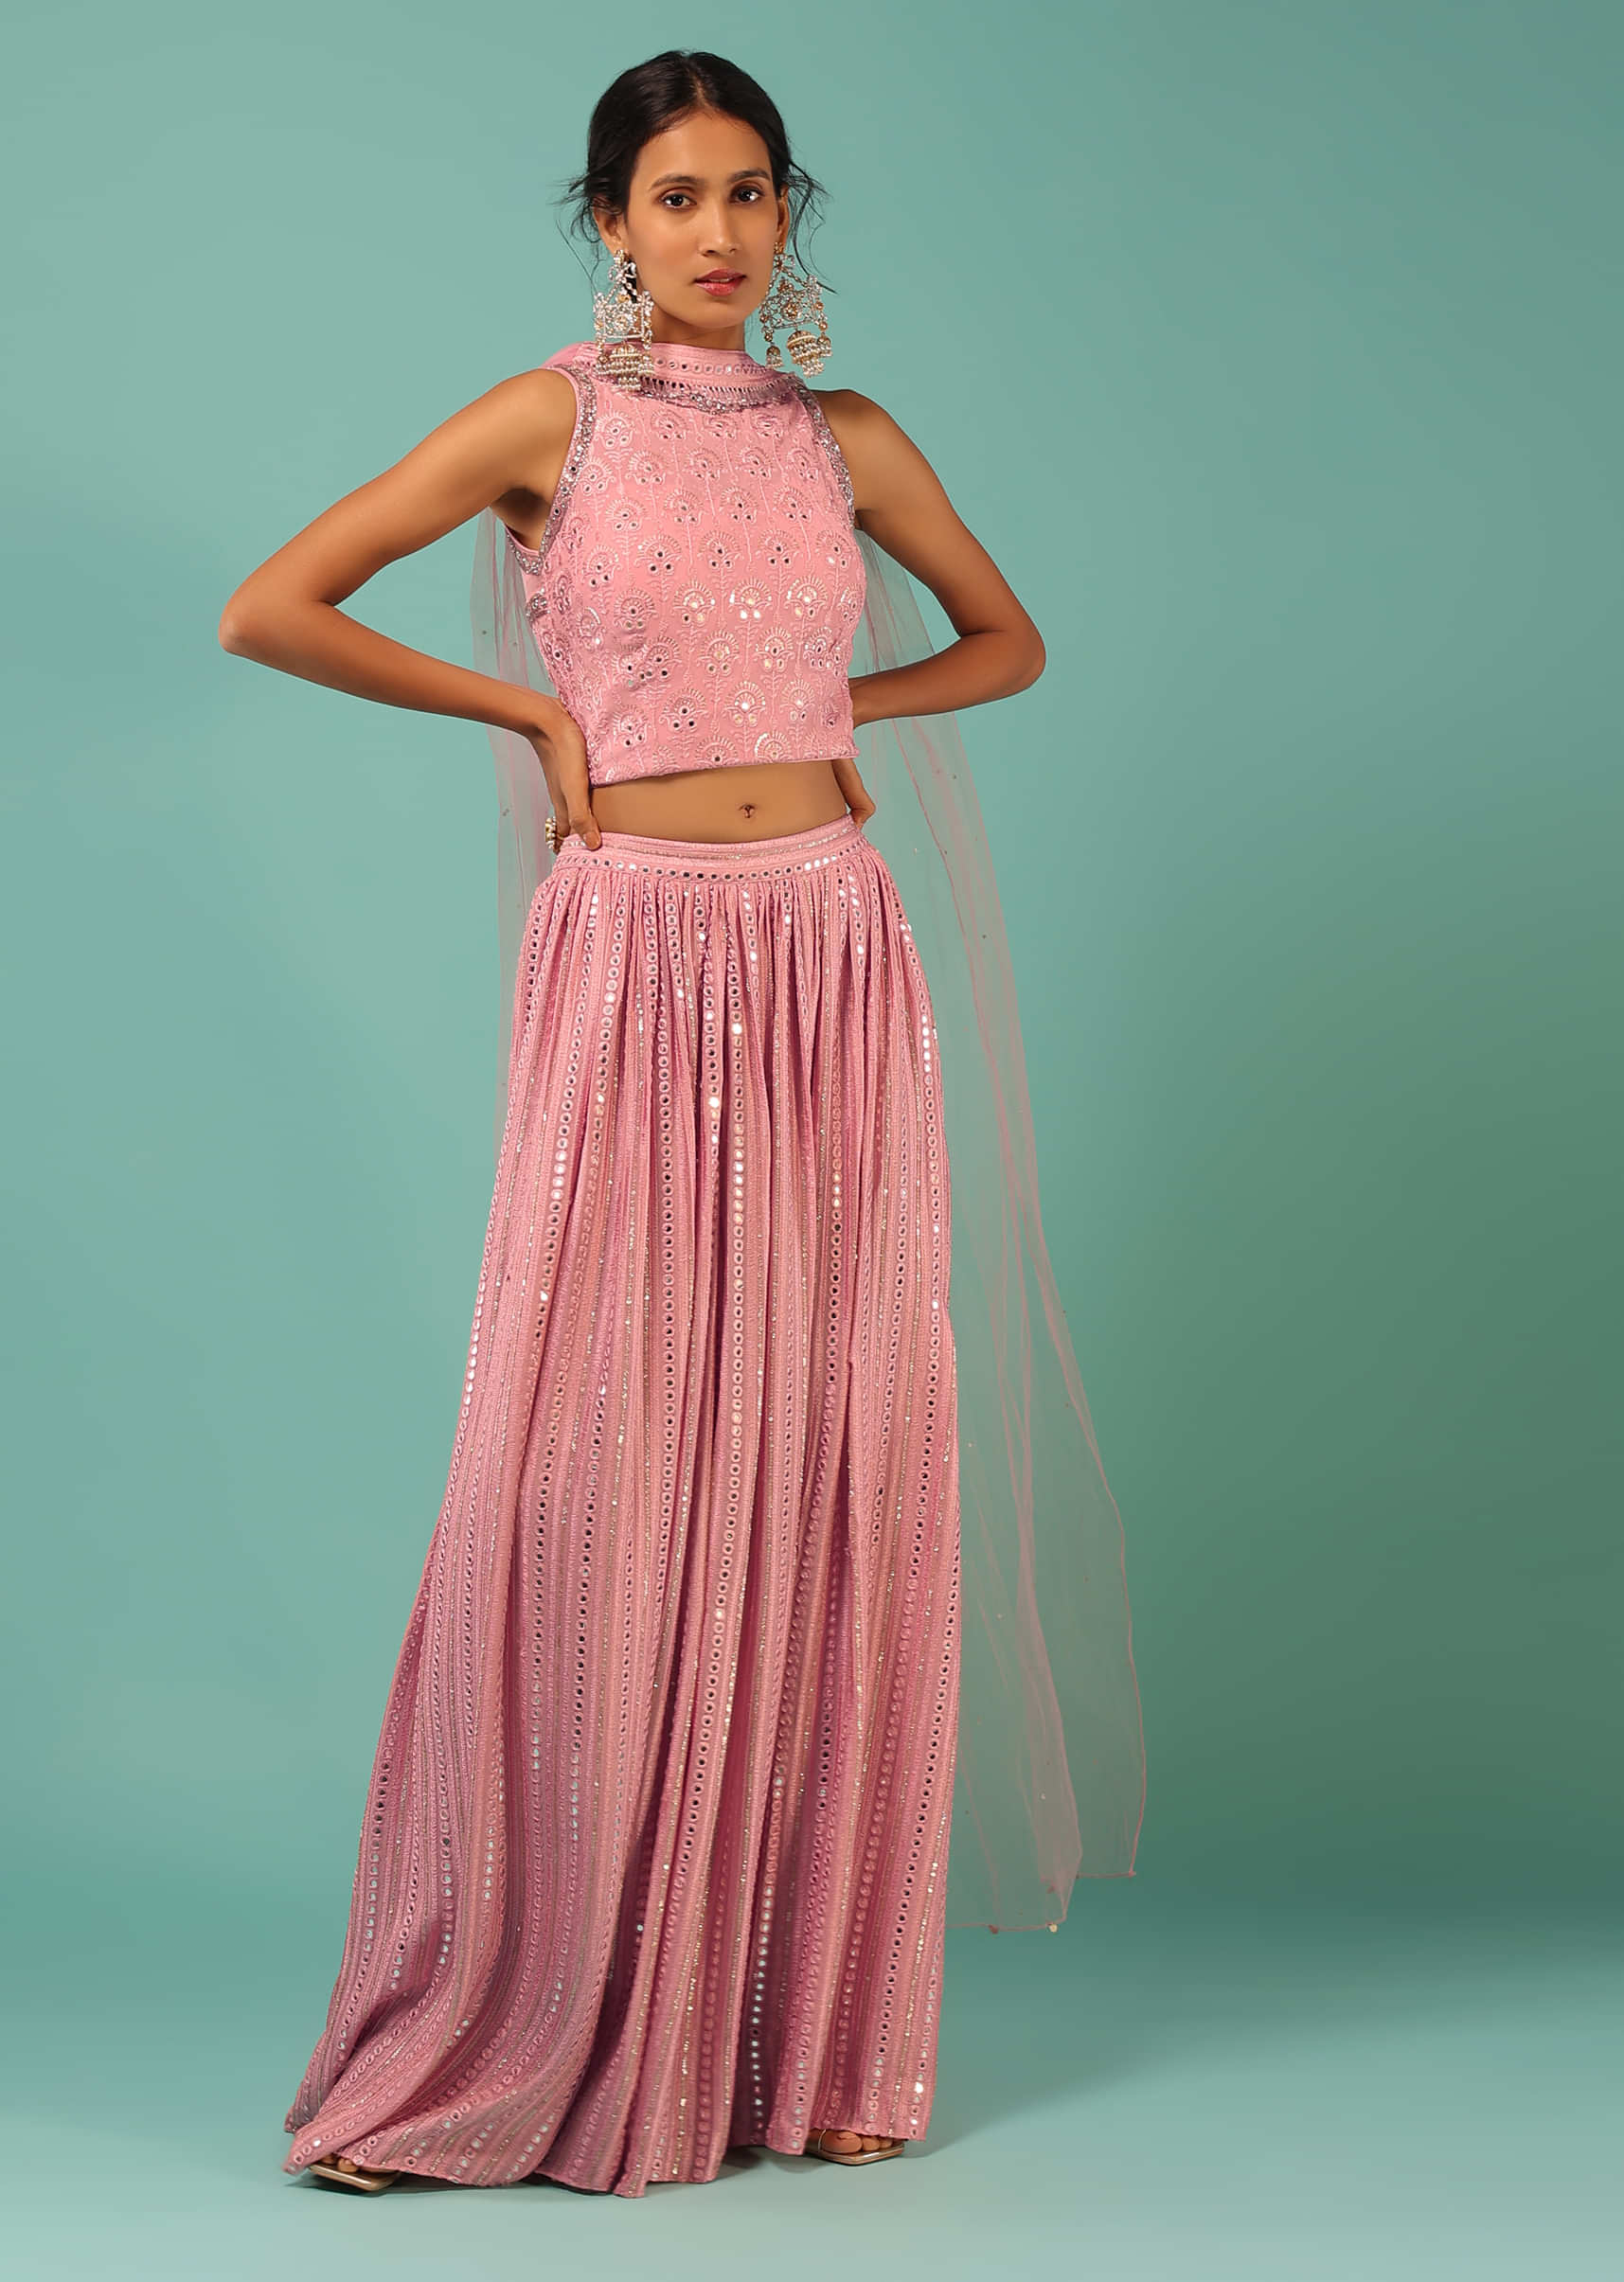 Rose Pink Palazzo And Crop Top Suit With Lucknowi Thread And Mirror Embroidery Topped With A Choker Dupatta